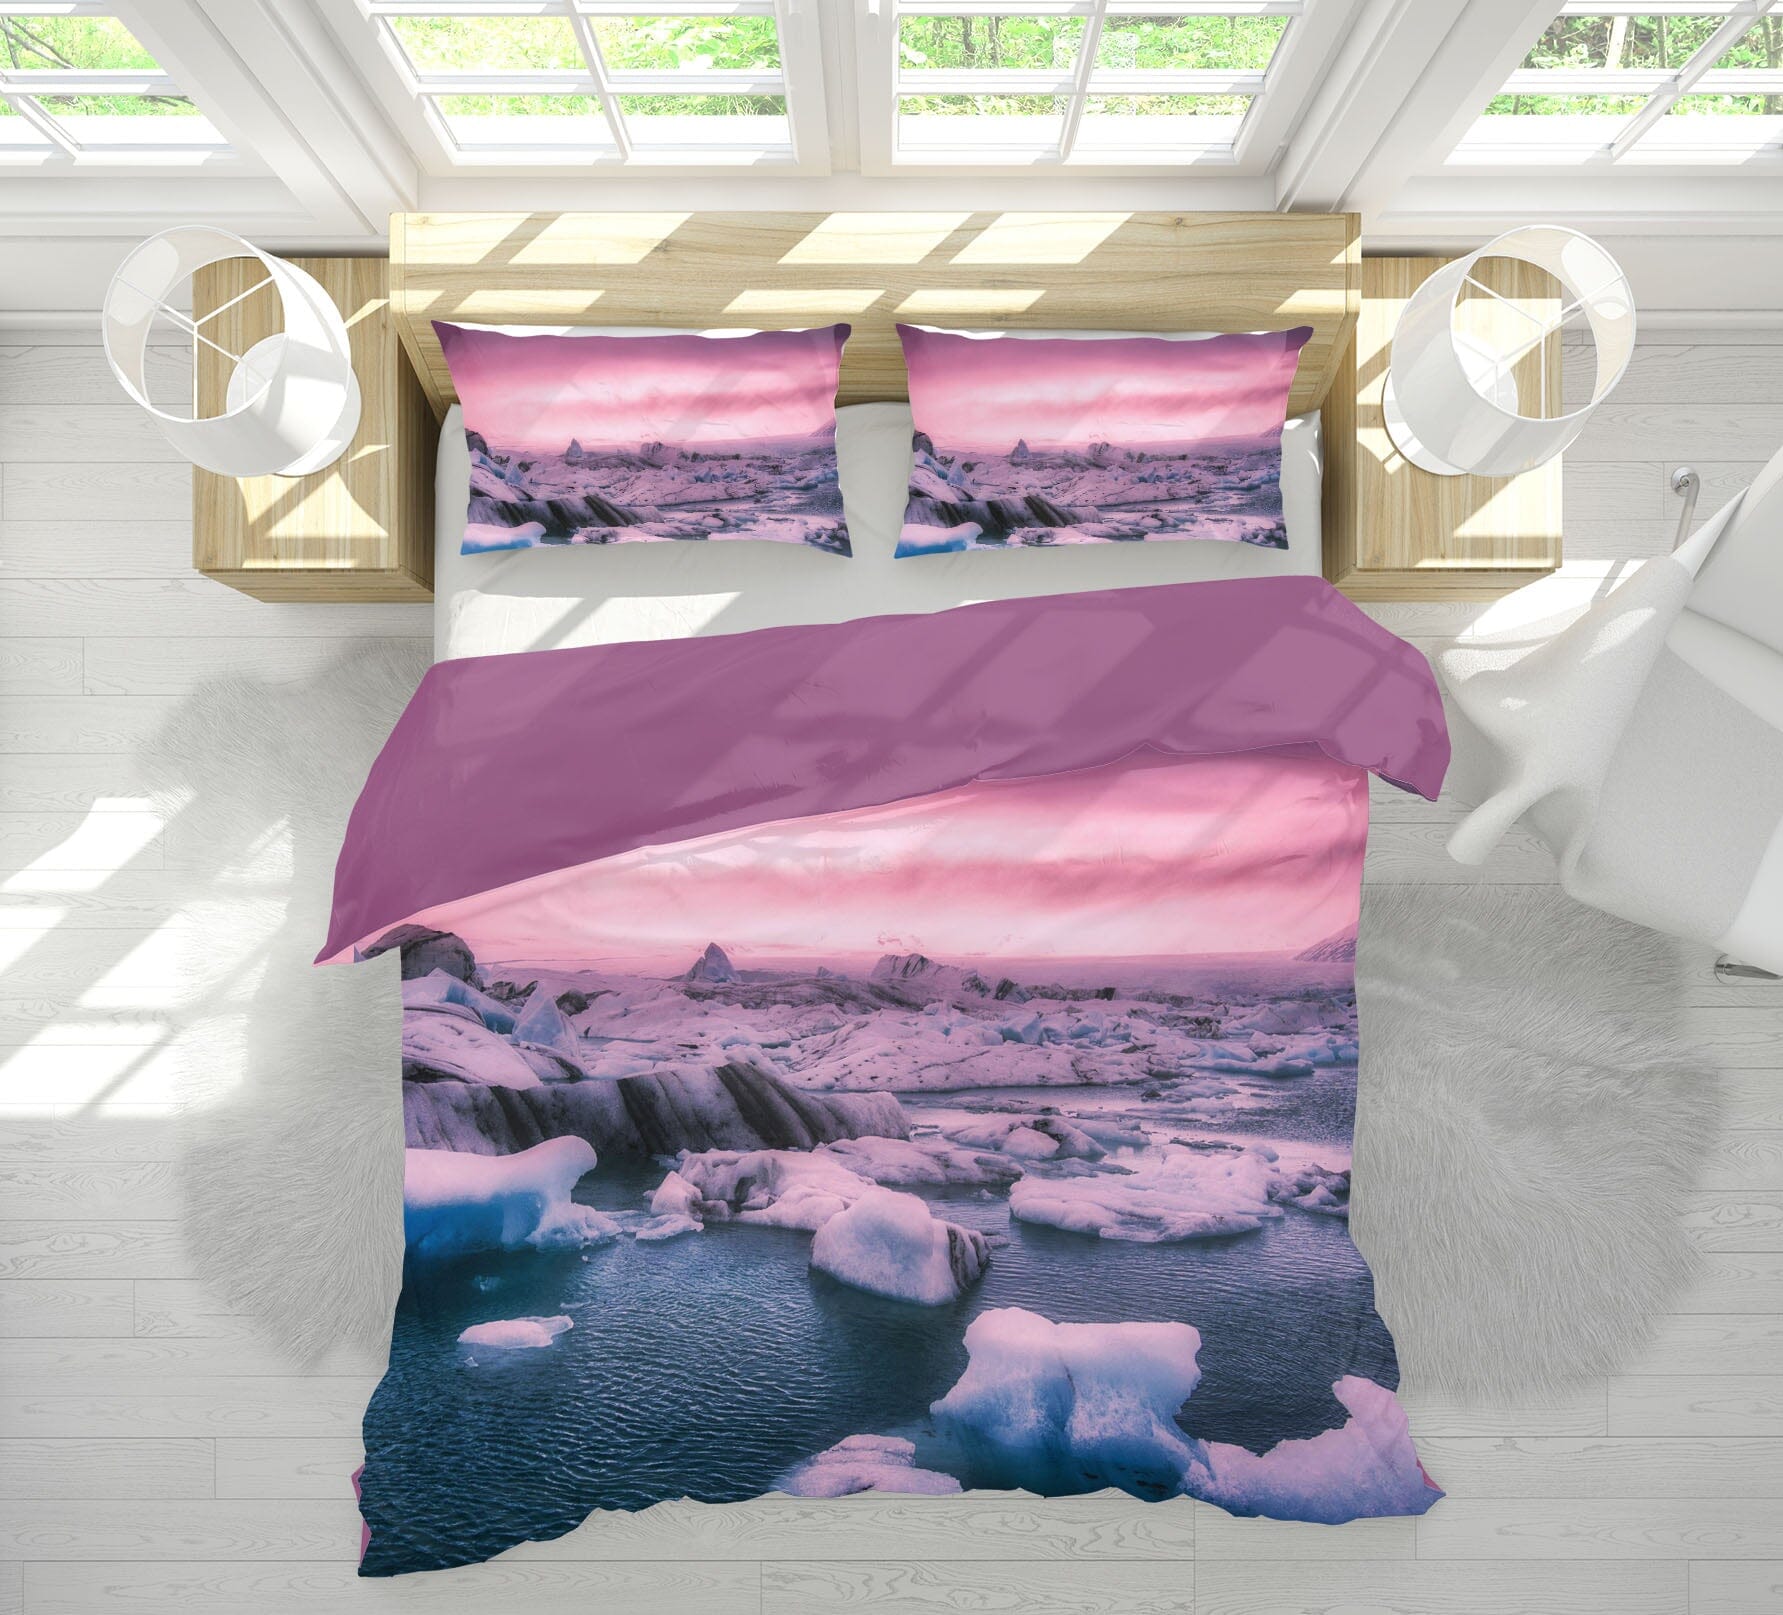 3D Pink Sunset 2156 Marco Carmassi Bedding Bed Pillowcases Quilt Quiet Covers AJ Creativity Home 